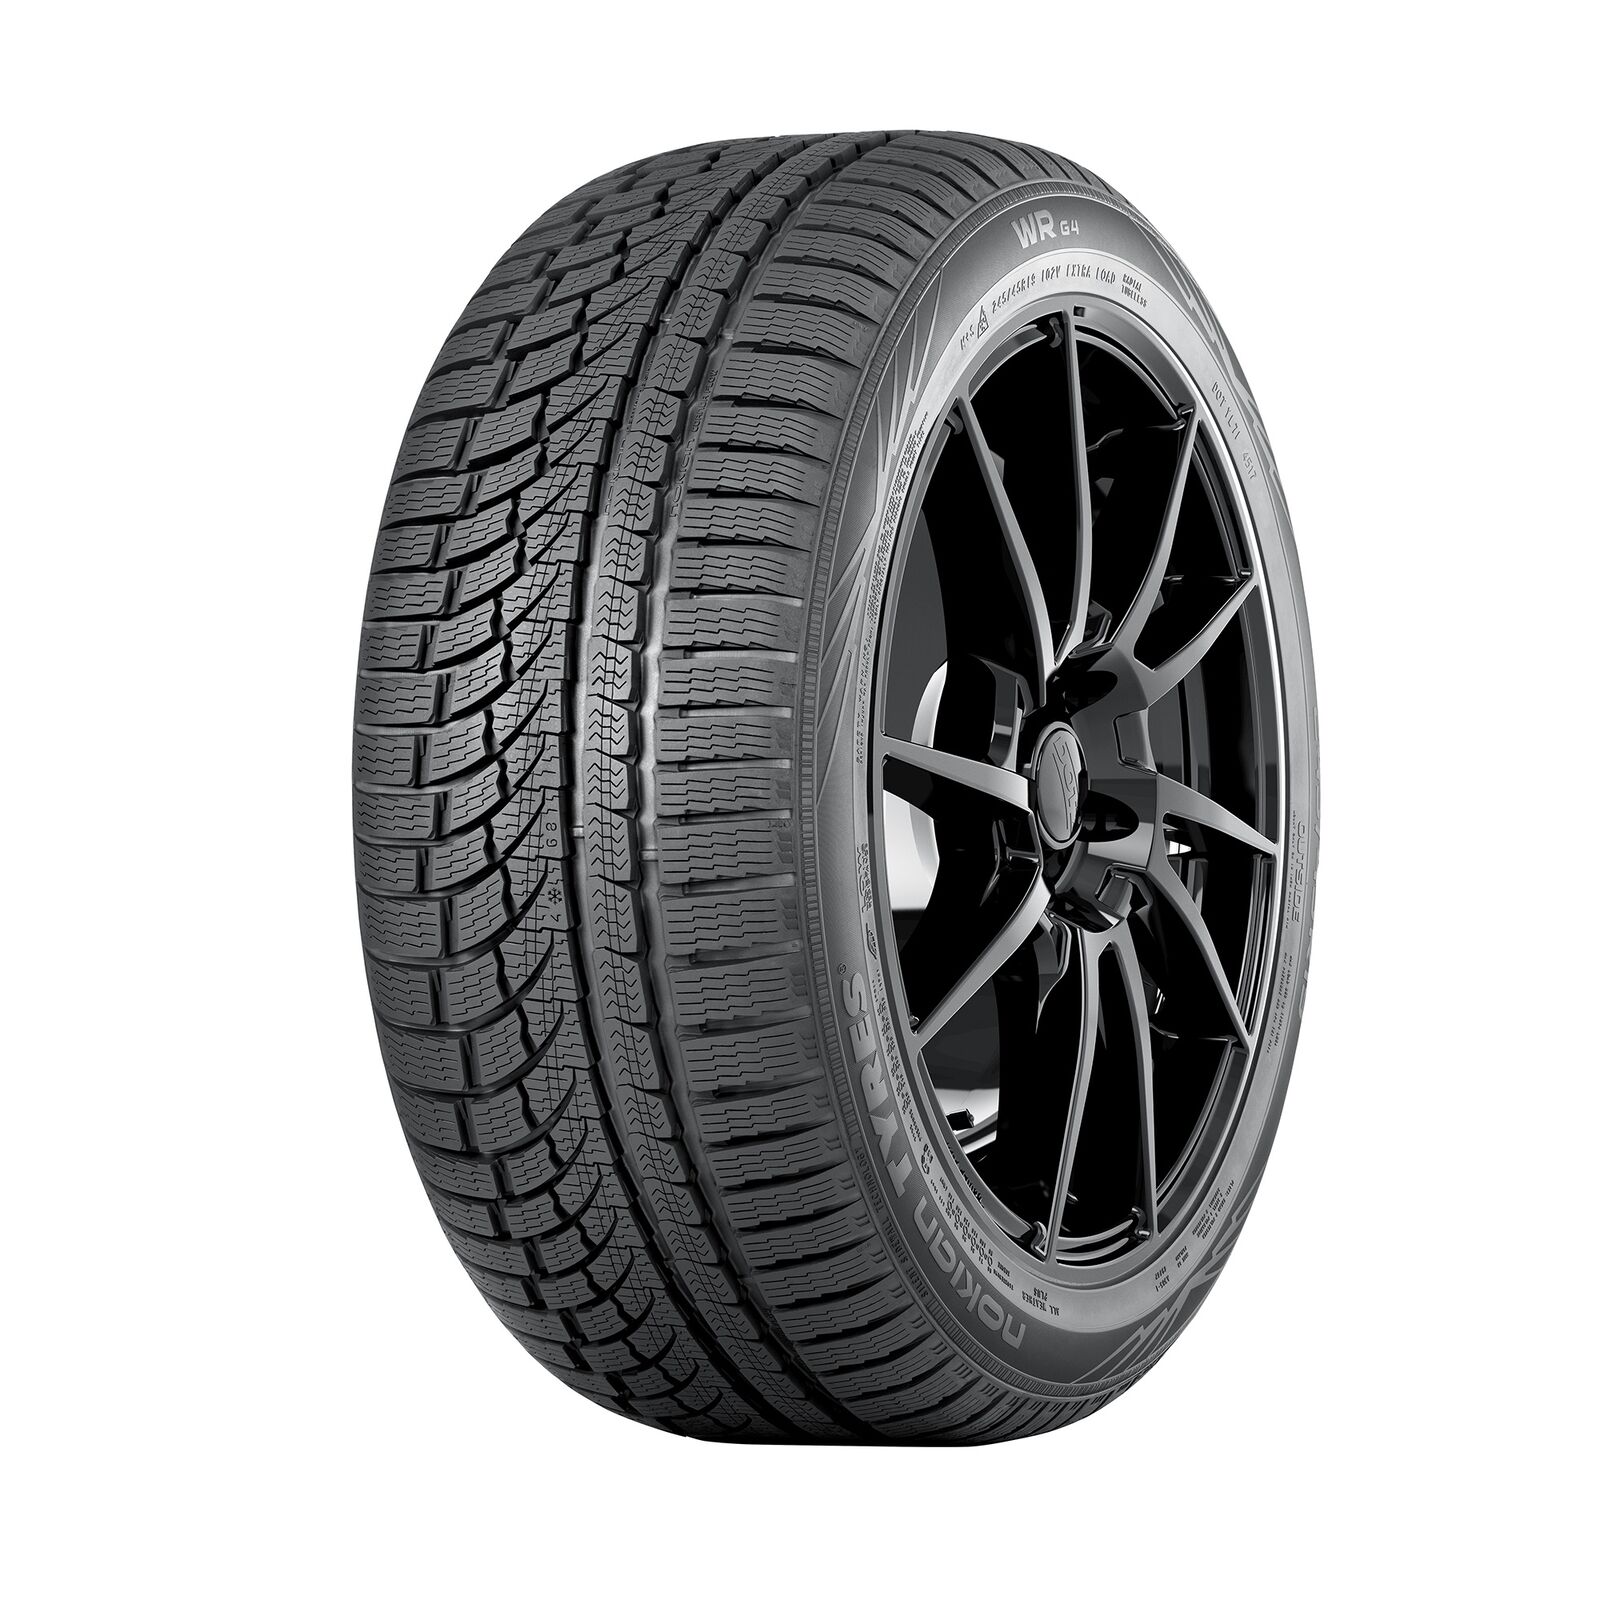 235/50R18 101V XL Nokian Tyres WR G4 All-Weather Tire 2355018 235 50 18